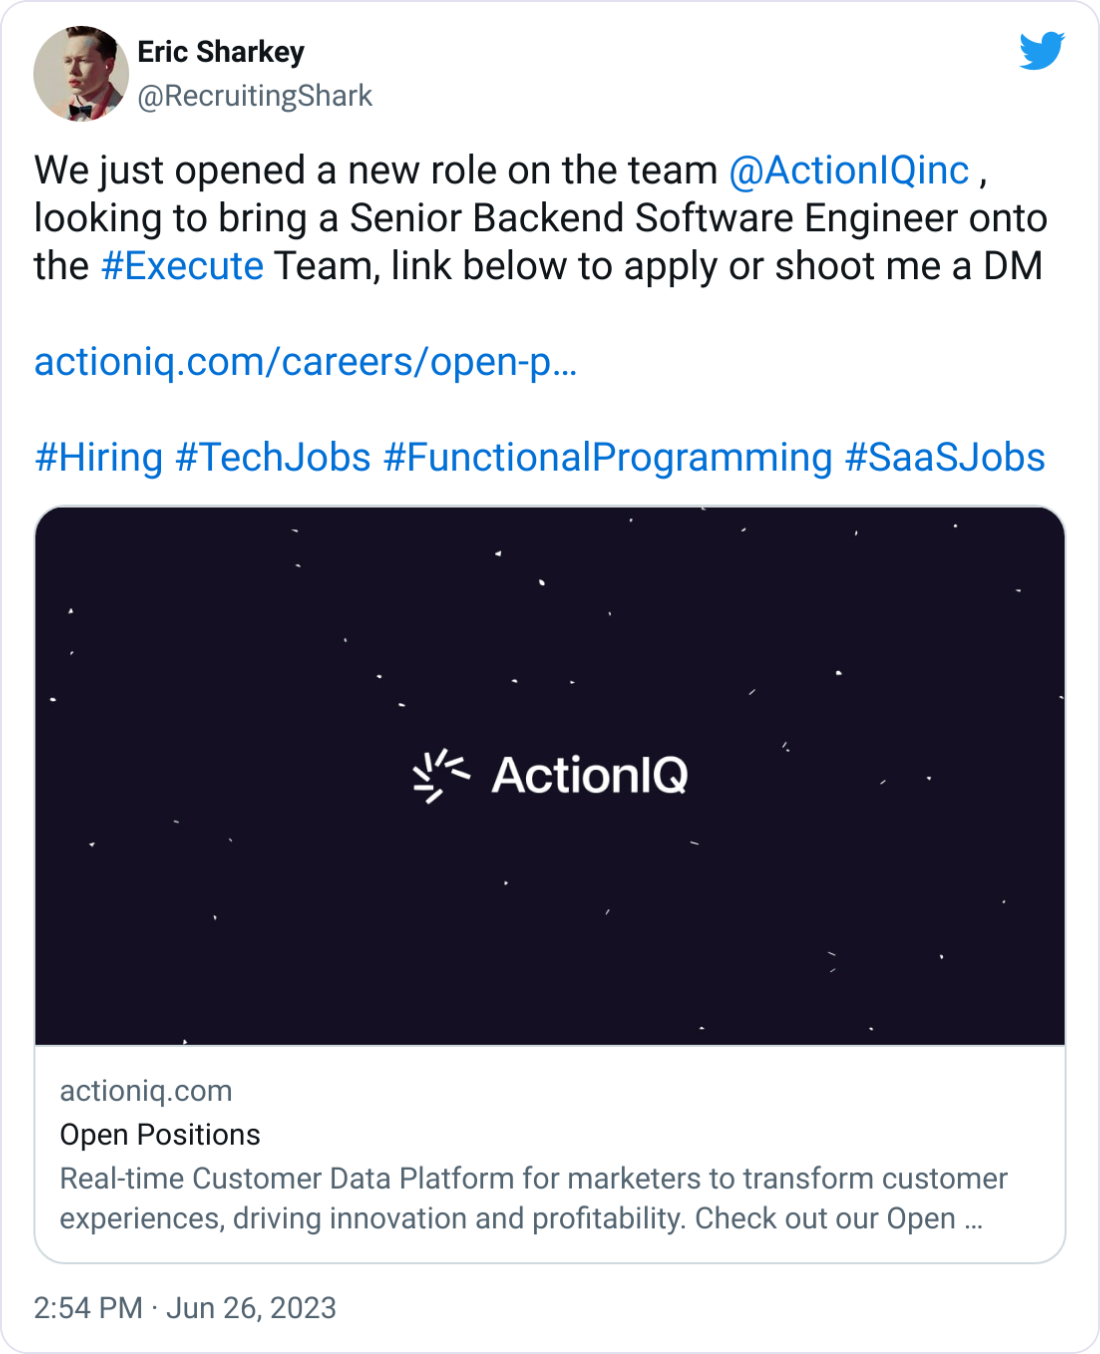  Eric Sharkey @RecruitingShark We just opened a new role on the team  @ActionIQinc  , looking to bring a Senior Backend Software Engineer onto the #Execute Team, link below to apply or shoot me a DM  https://actioniq.com/careers/open-positions/?gh_jid=4917172004  #Hiring #TechJobs #FunctionalProgramming #SaaSJobs